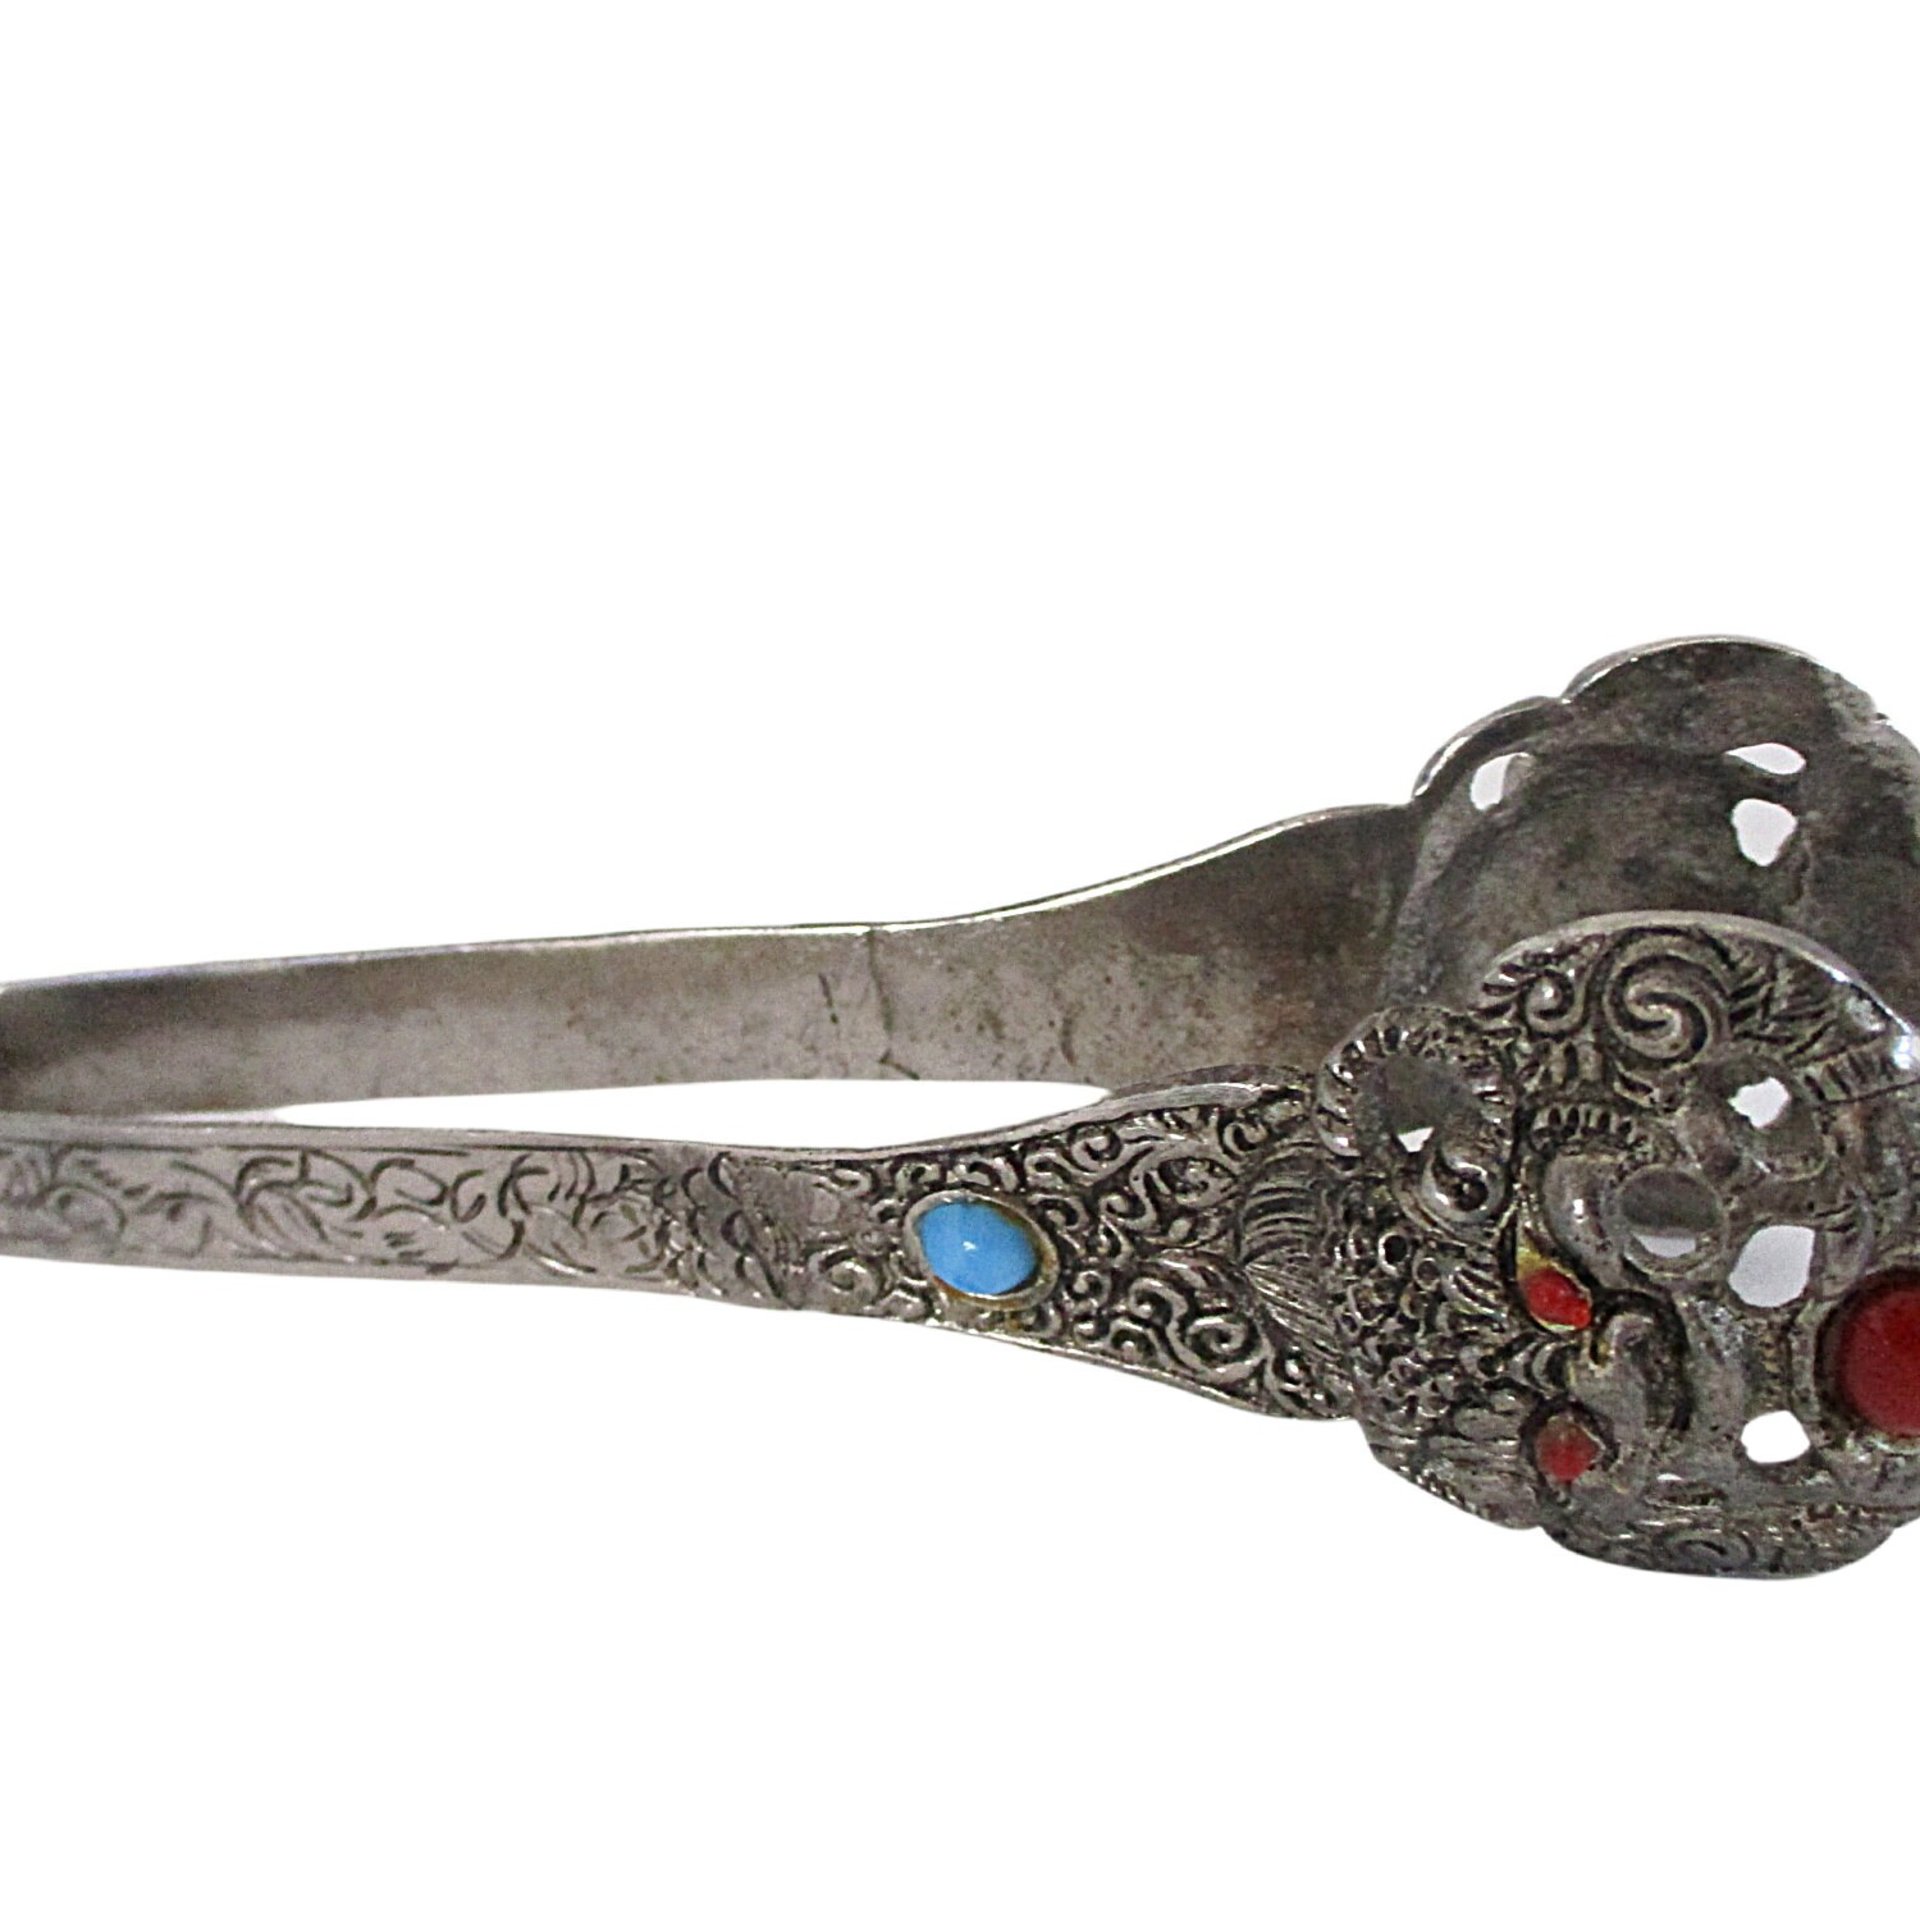 Vintage Ice Tongs, Chinese Dragon Head, Ornate with Colored Stones